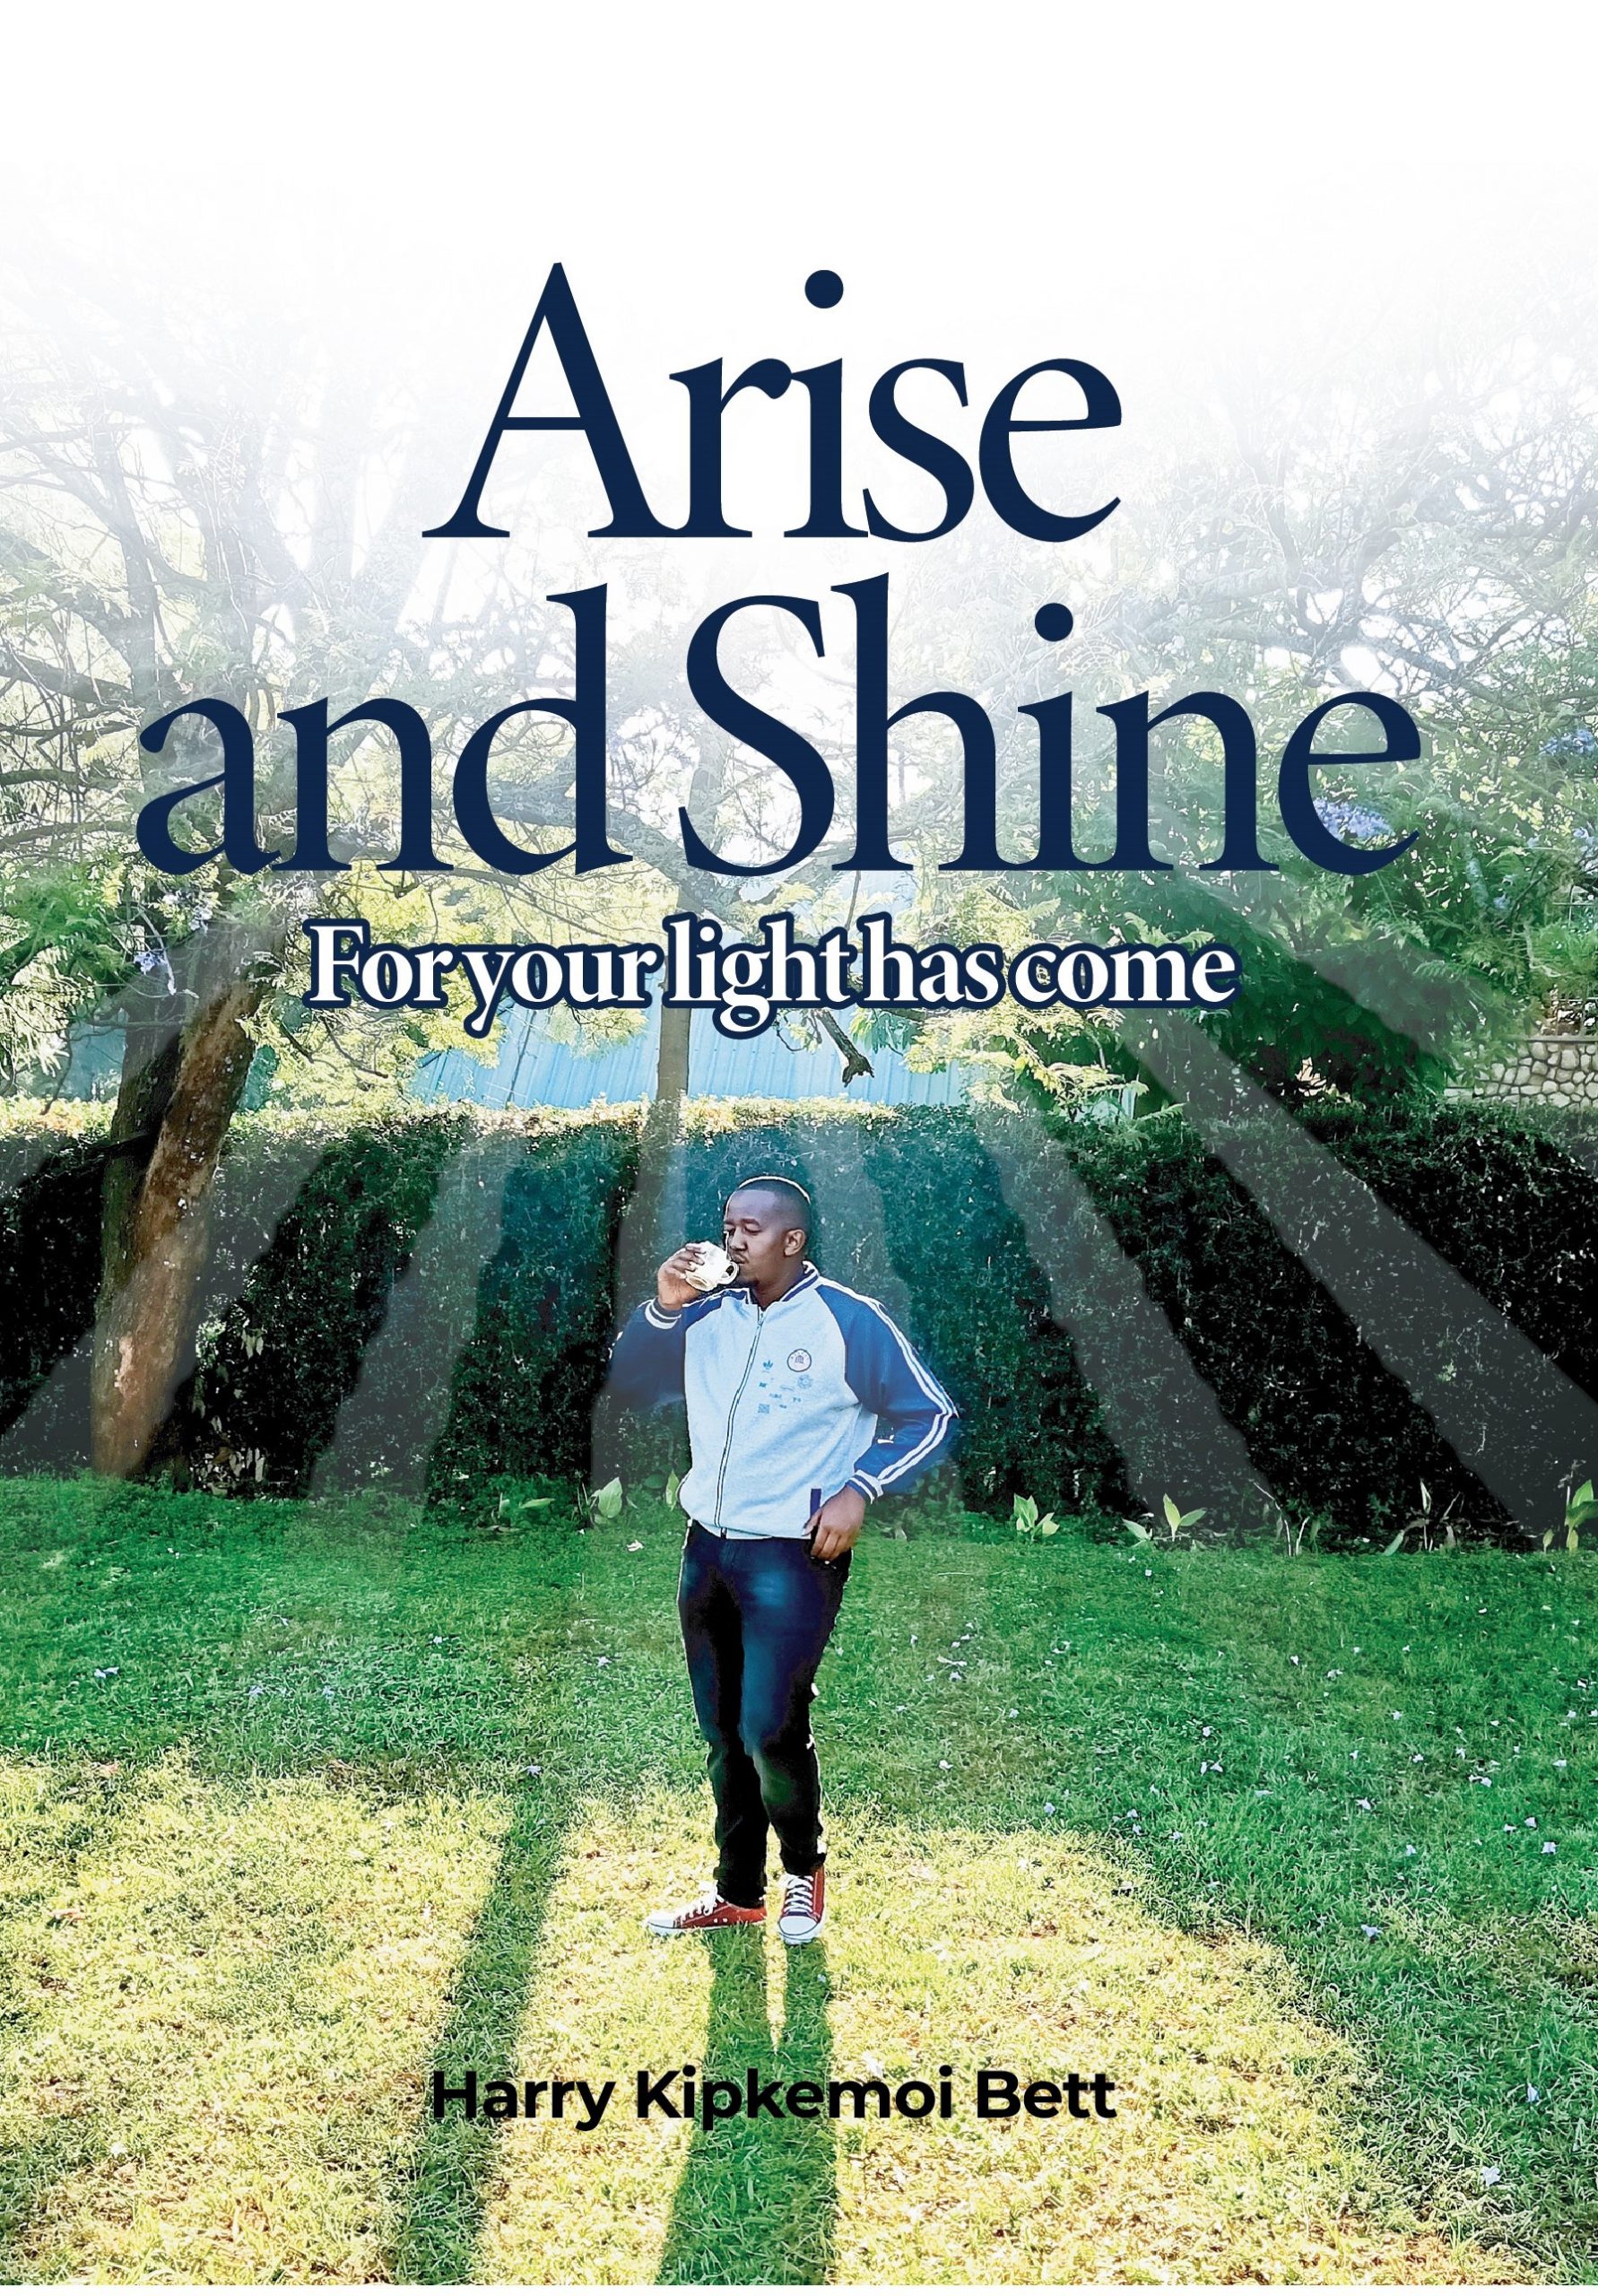 Edited cover Arise and shine